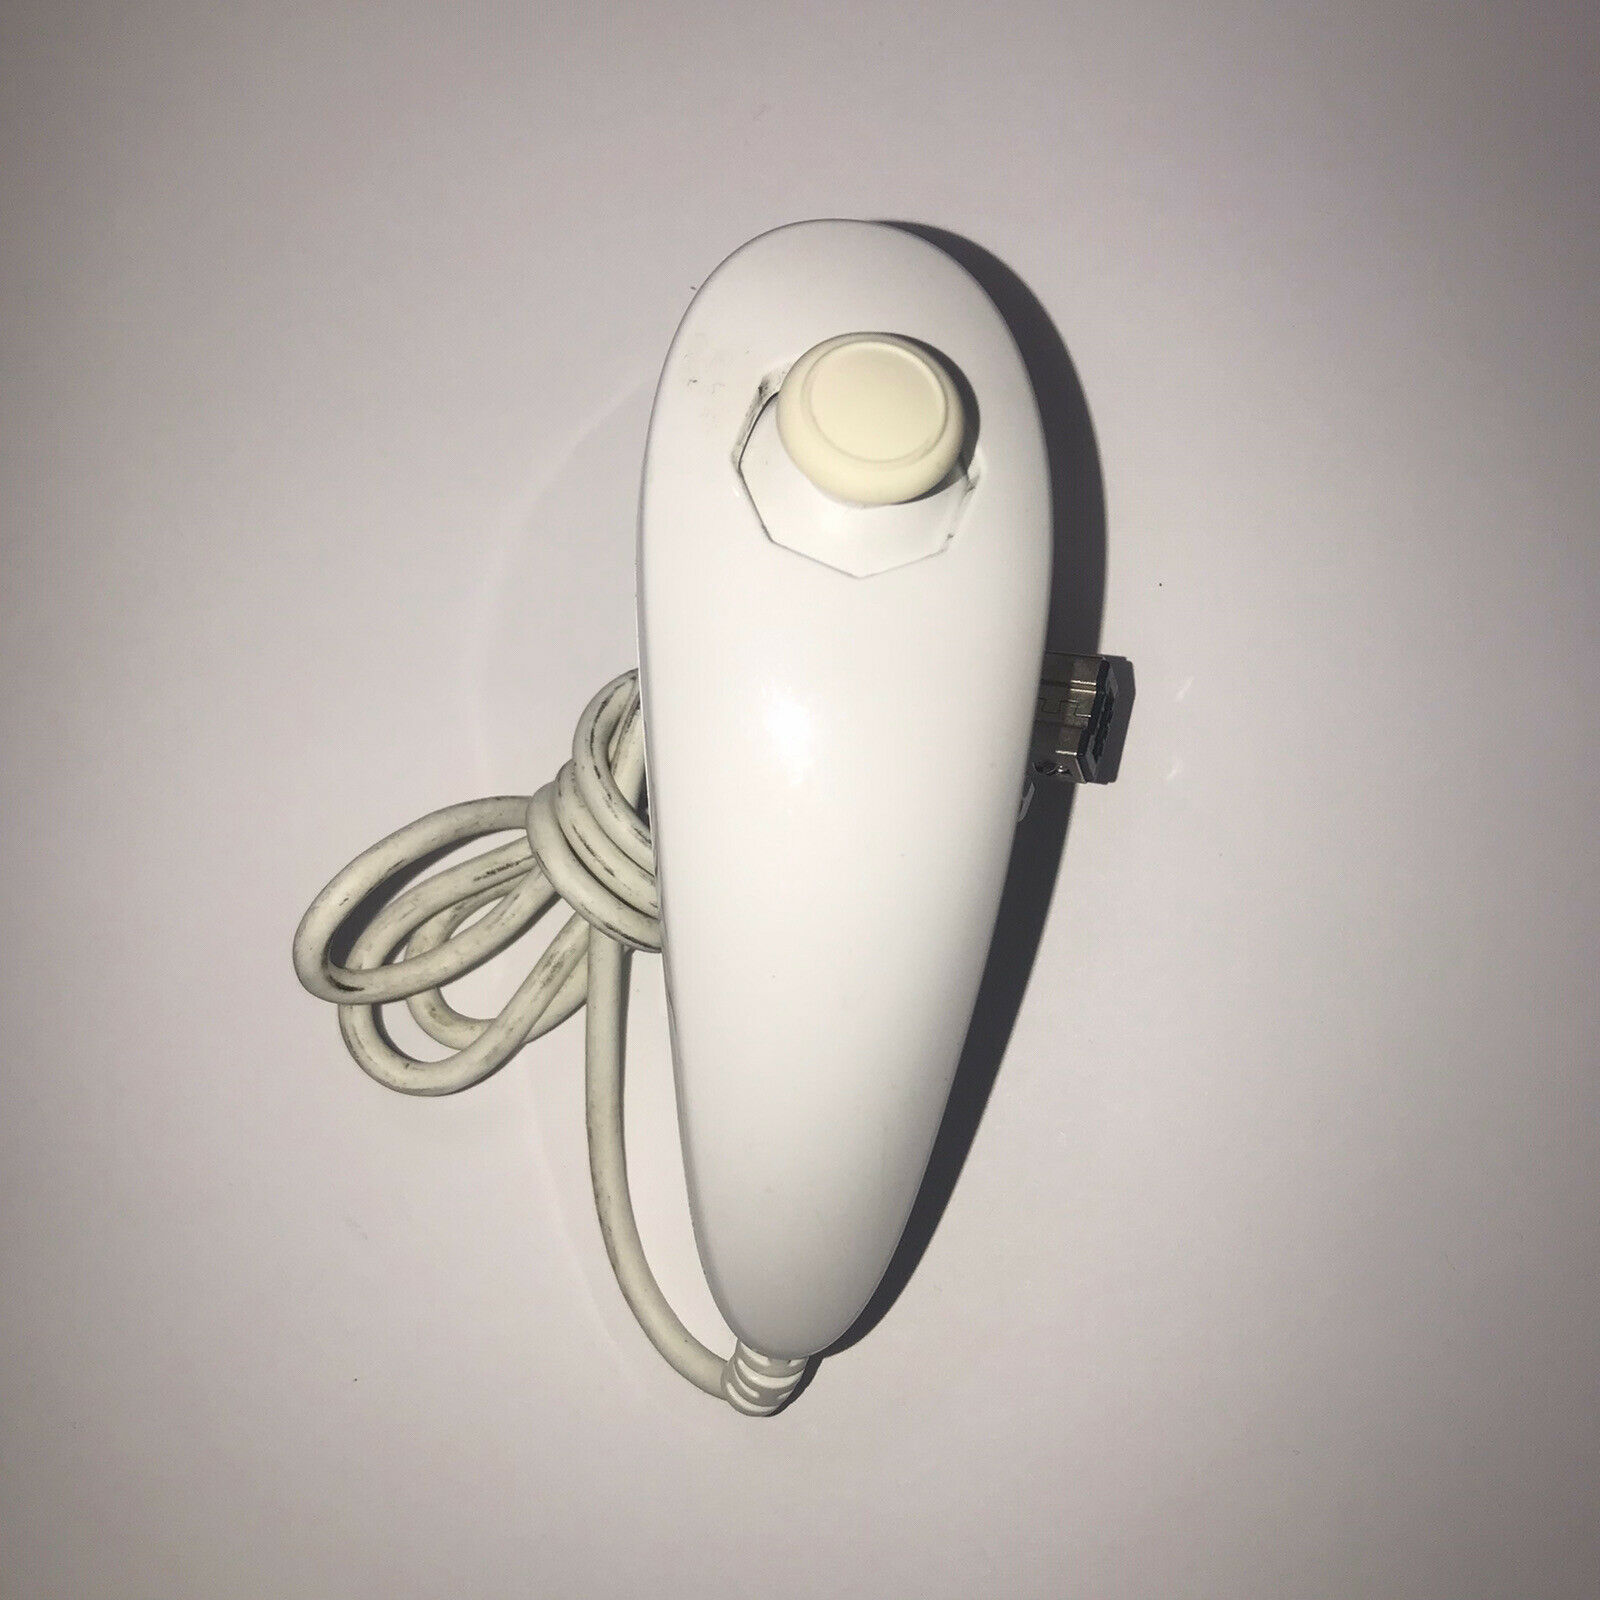 Nintendo Wii White Nunchuk Controller Authentic Model Number RVL 004 Works Used